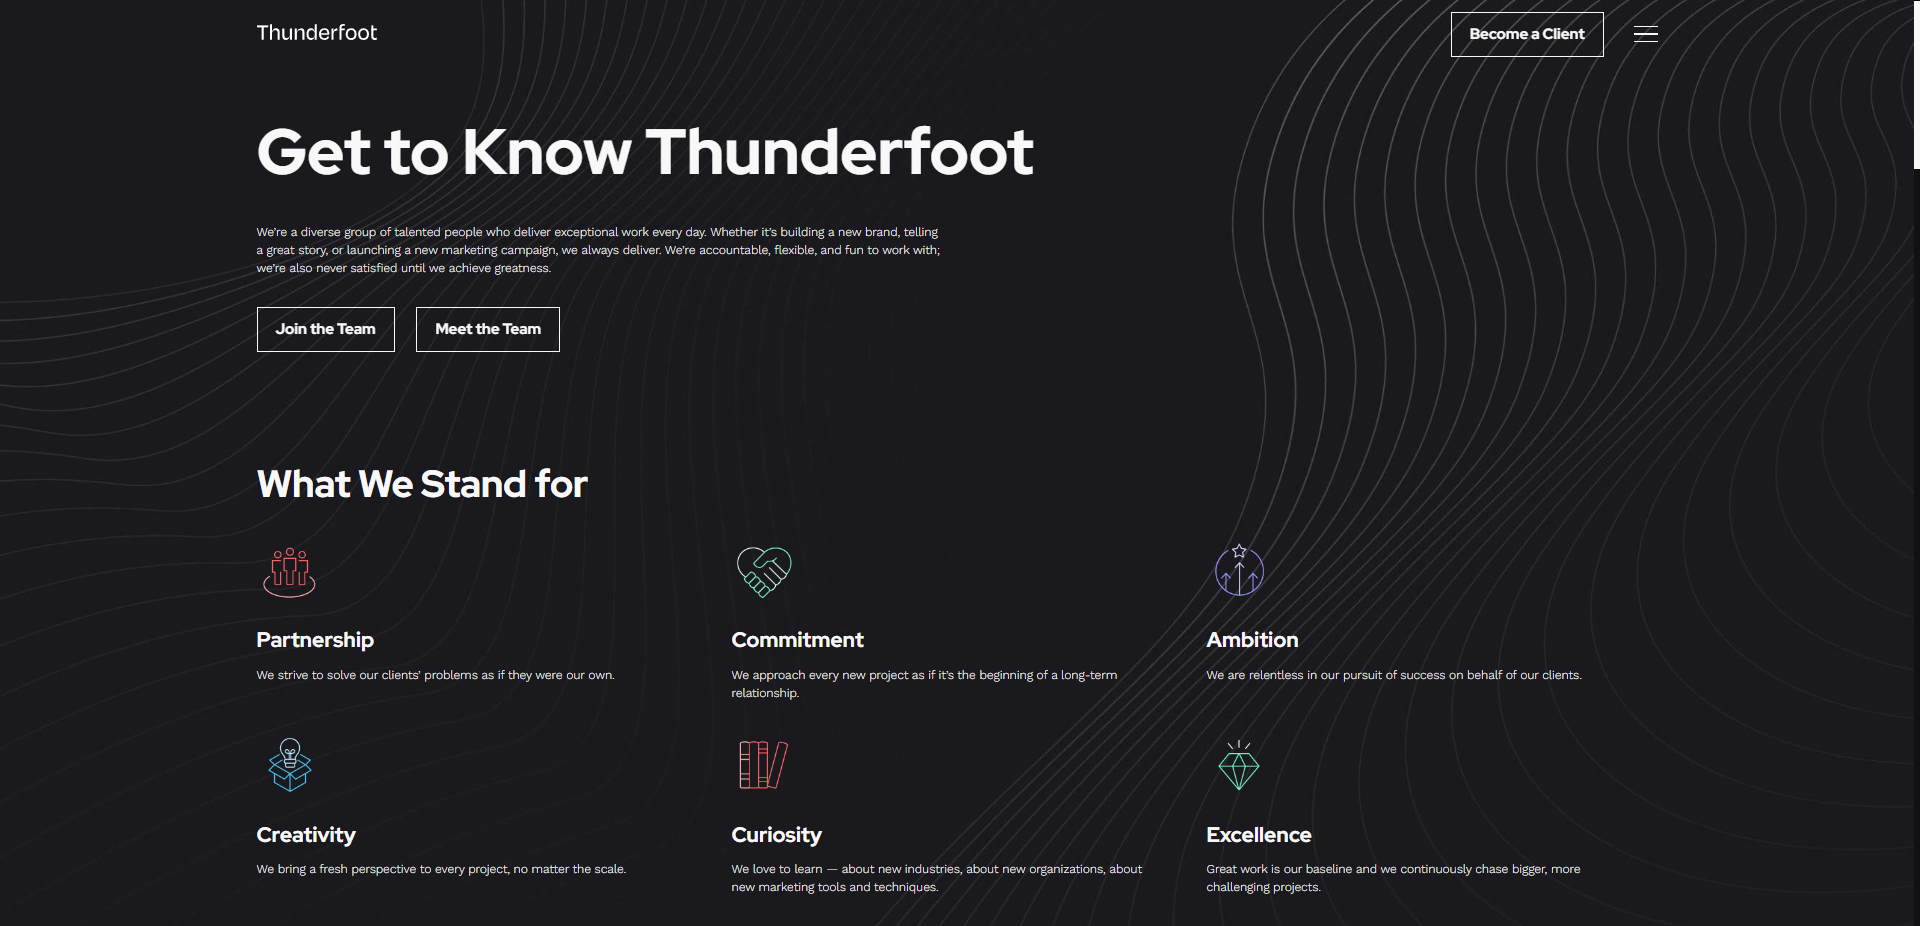 Thunderfoot Design Agencies About Page